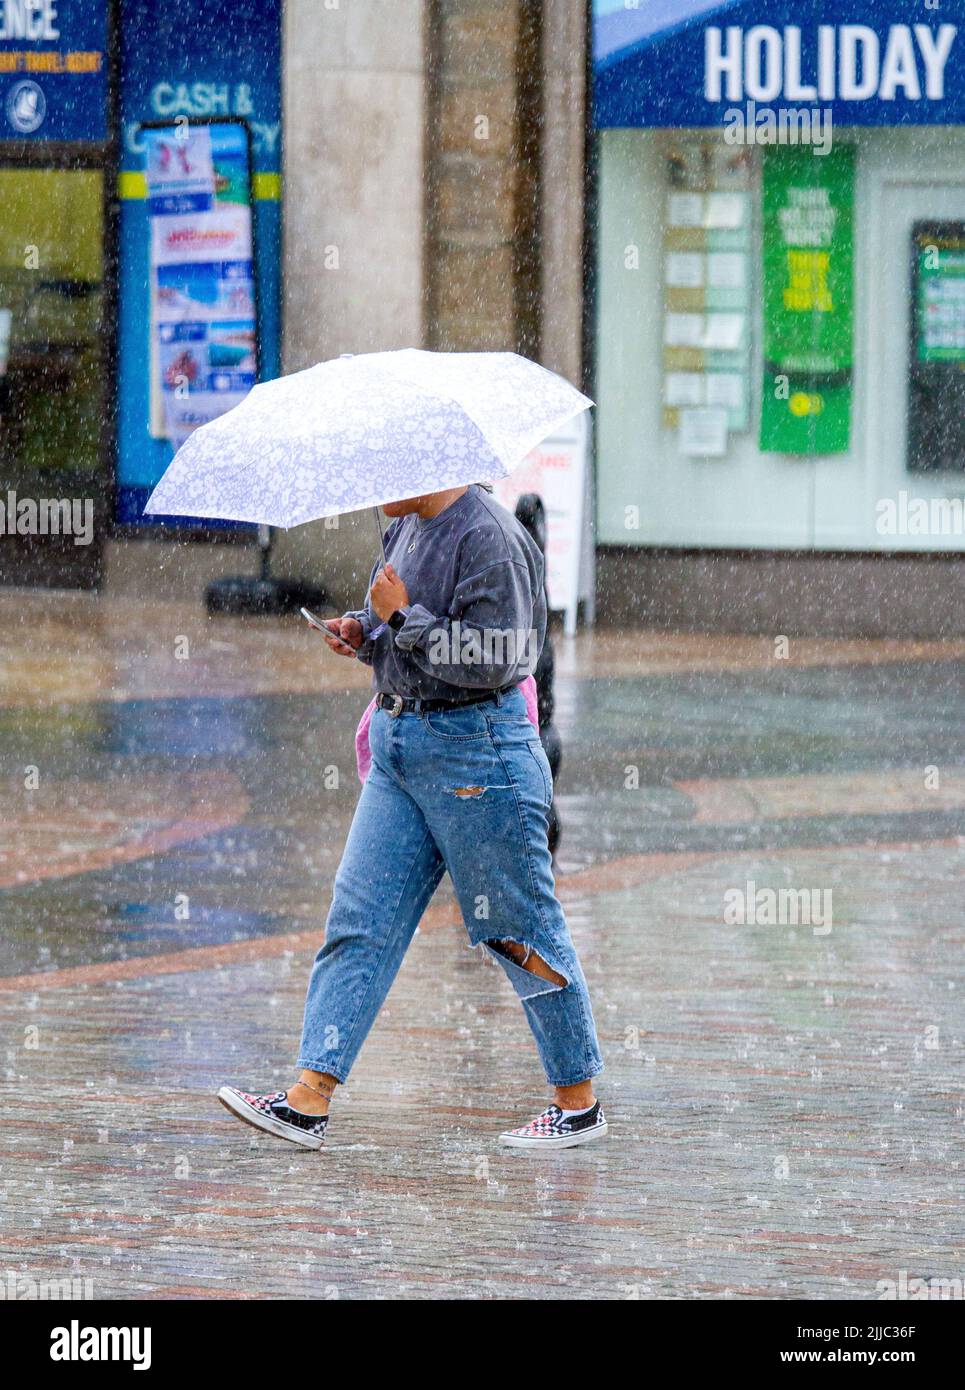 Dundee, Tayside, Scotland, UK. 25th July, 2022. UK Weather: The combination of unexpected, heavy showers and humidity caused temperatures to exceed 18°C in some areas of North East Scotland. Monday morning shoppers are caught off guard by sudden heavy downpours in Dundee city centre. Credit: Dundee Photographics/Alamy Live News Stock Photo